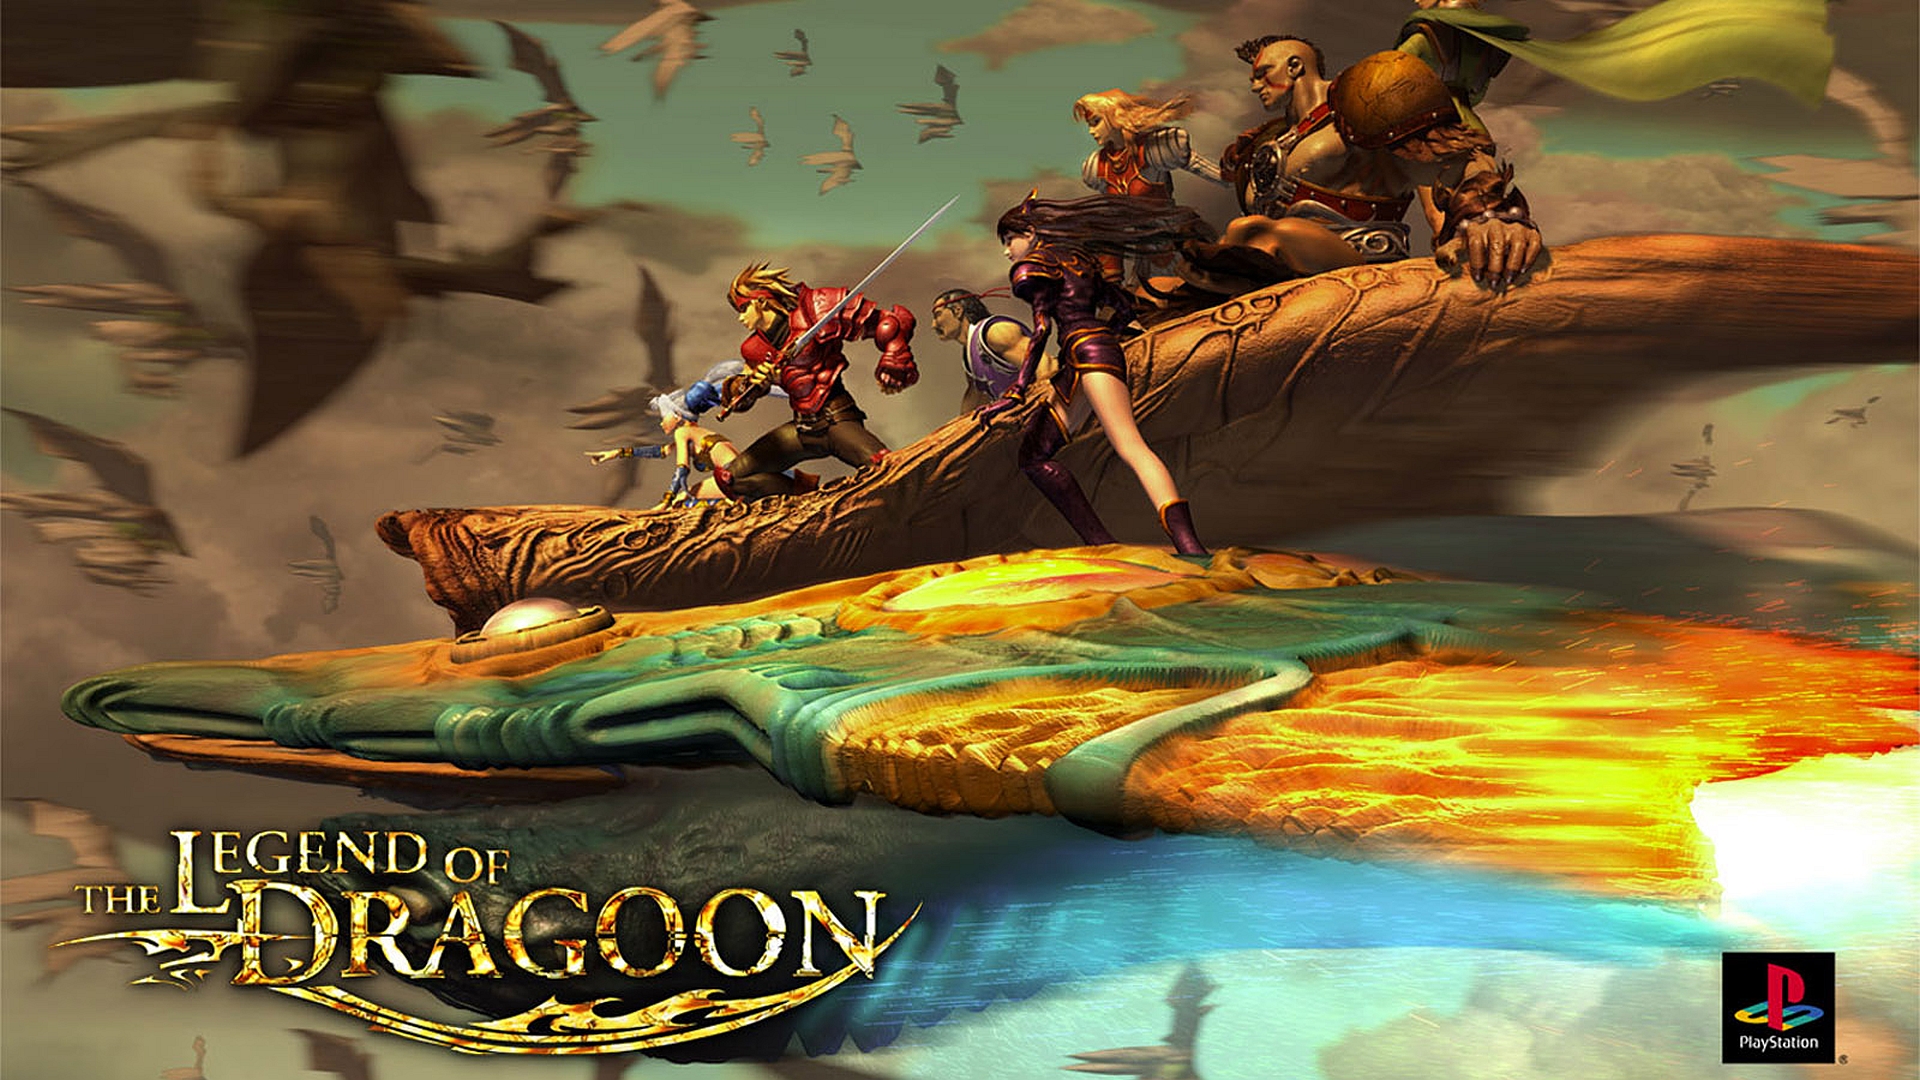 Video Game The Legend Of Dragoon HD Wallpaper | Background Image